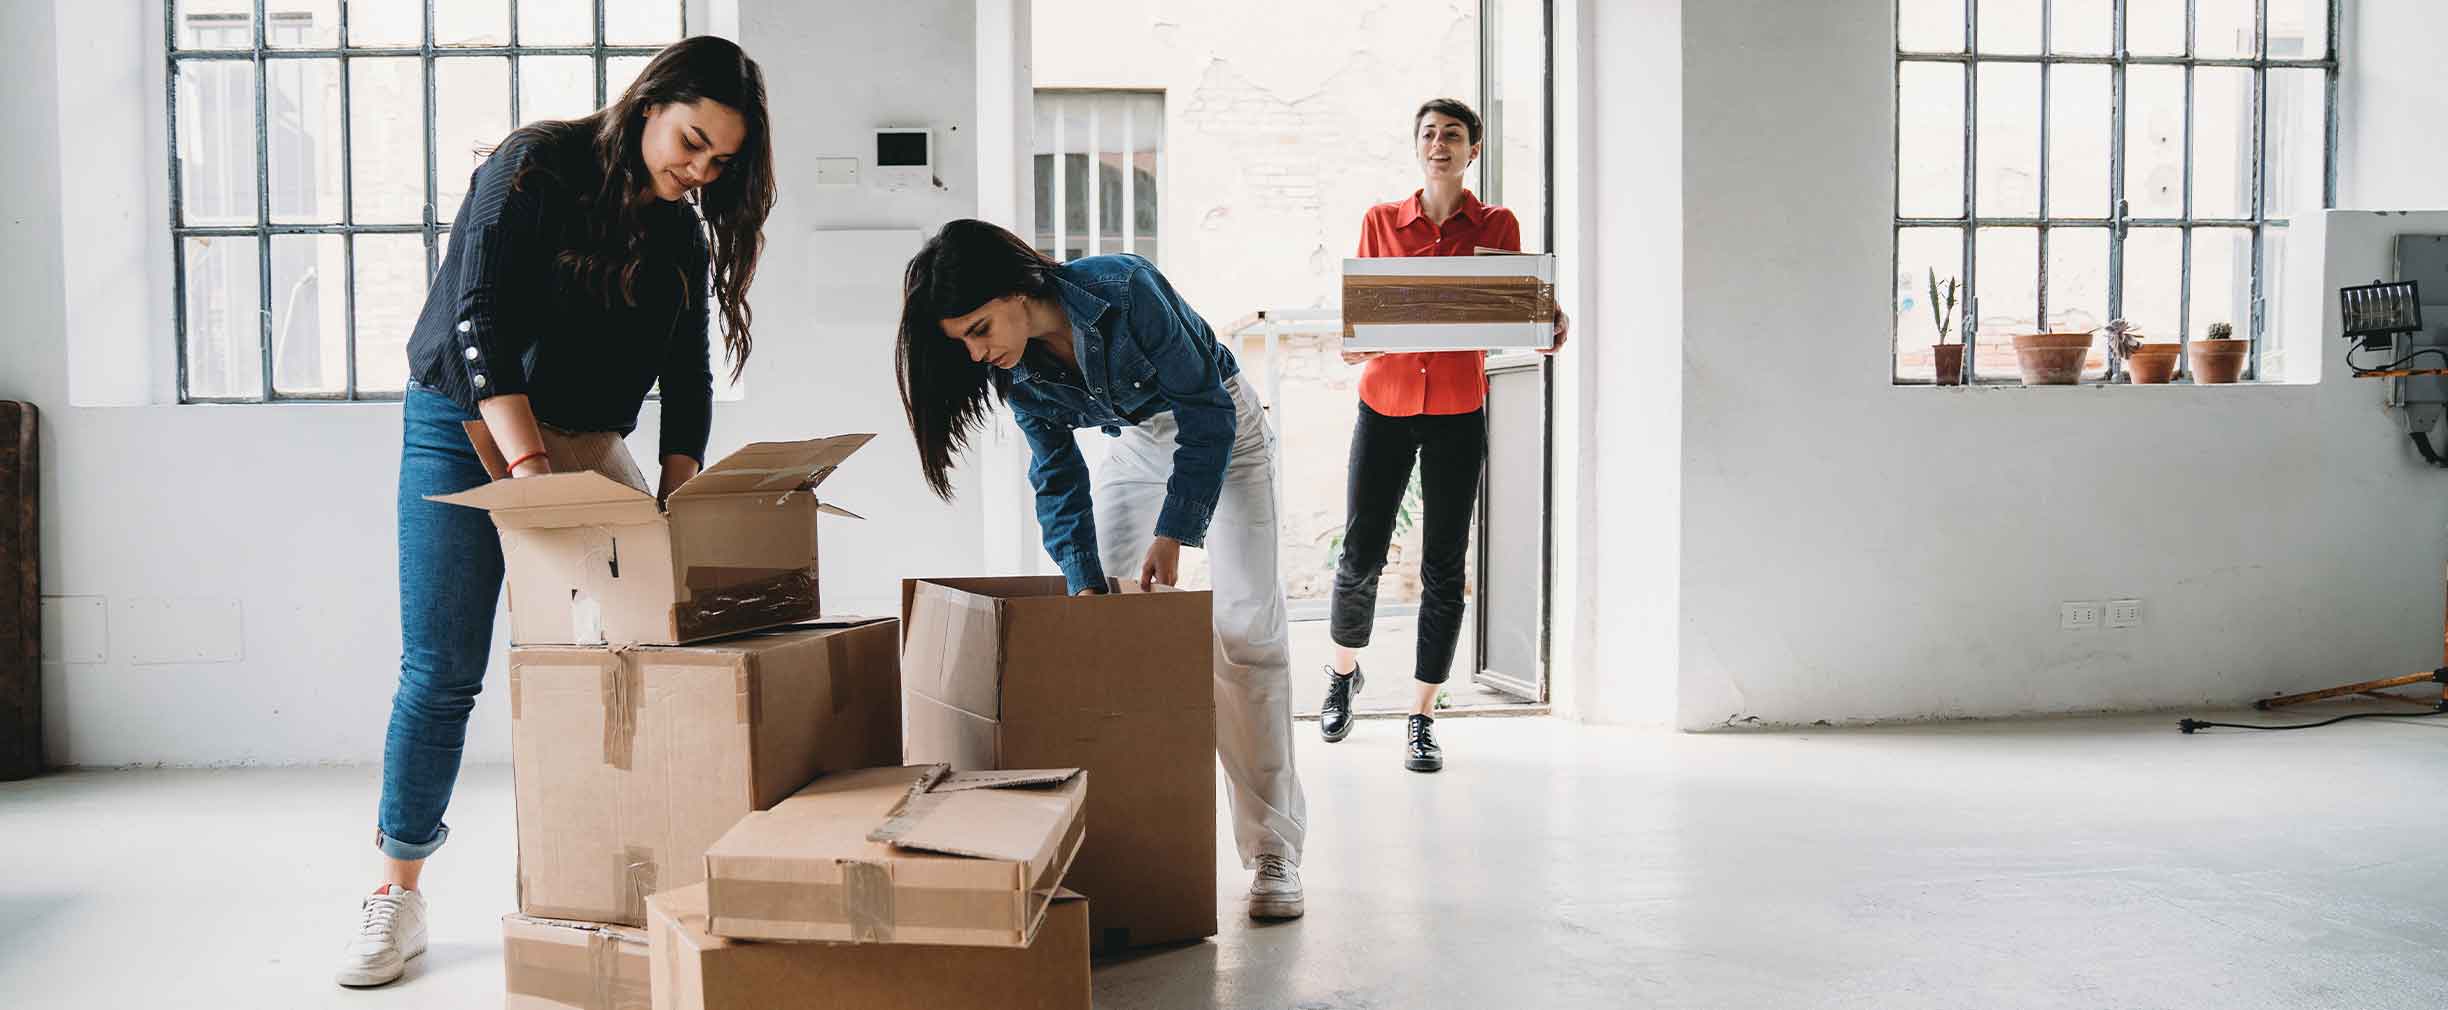 A small business owner and two of her employees unpack boxes in a sunlit new office space.